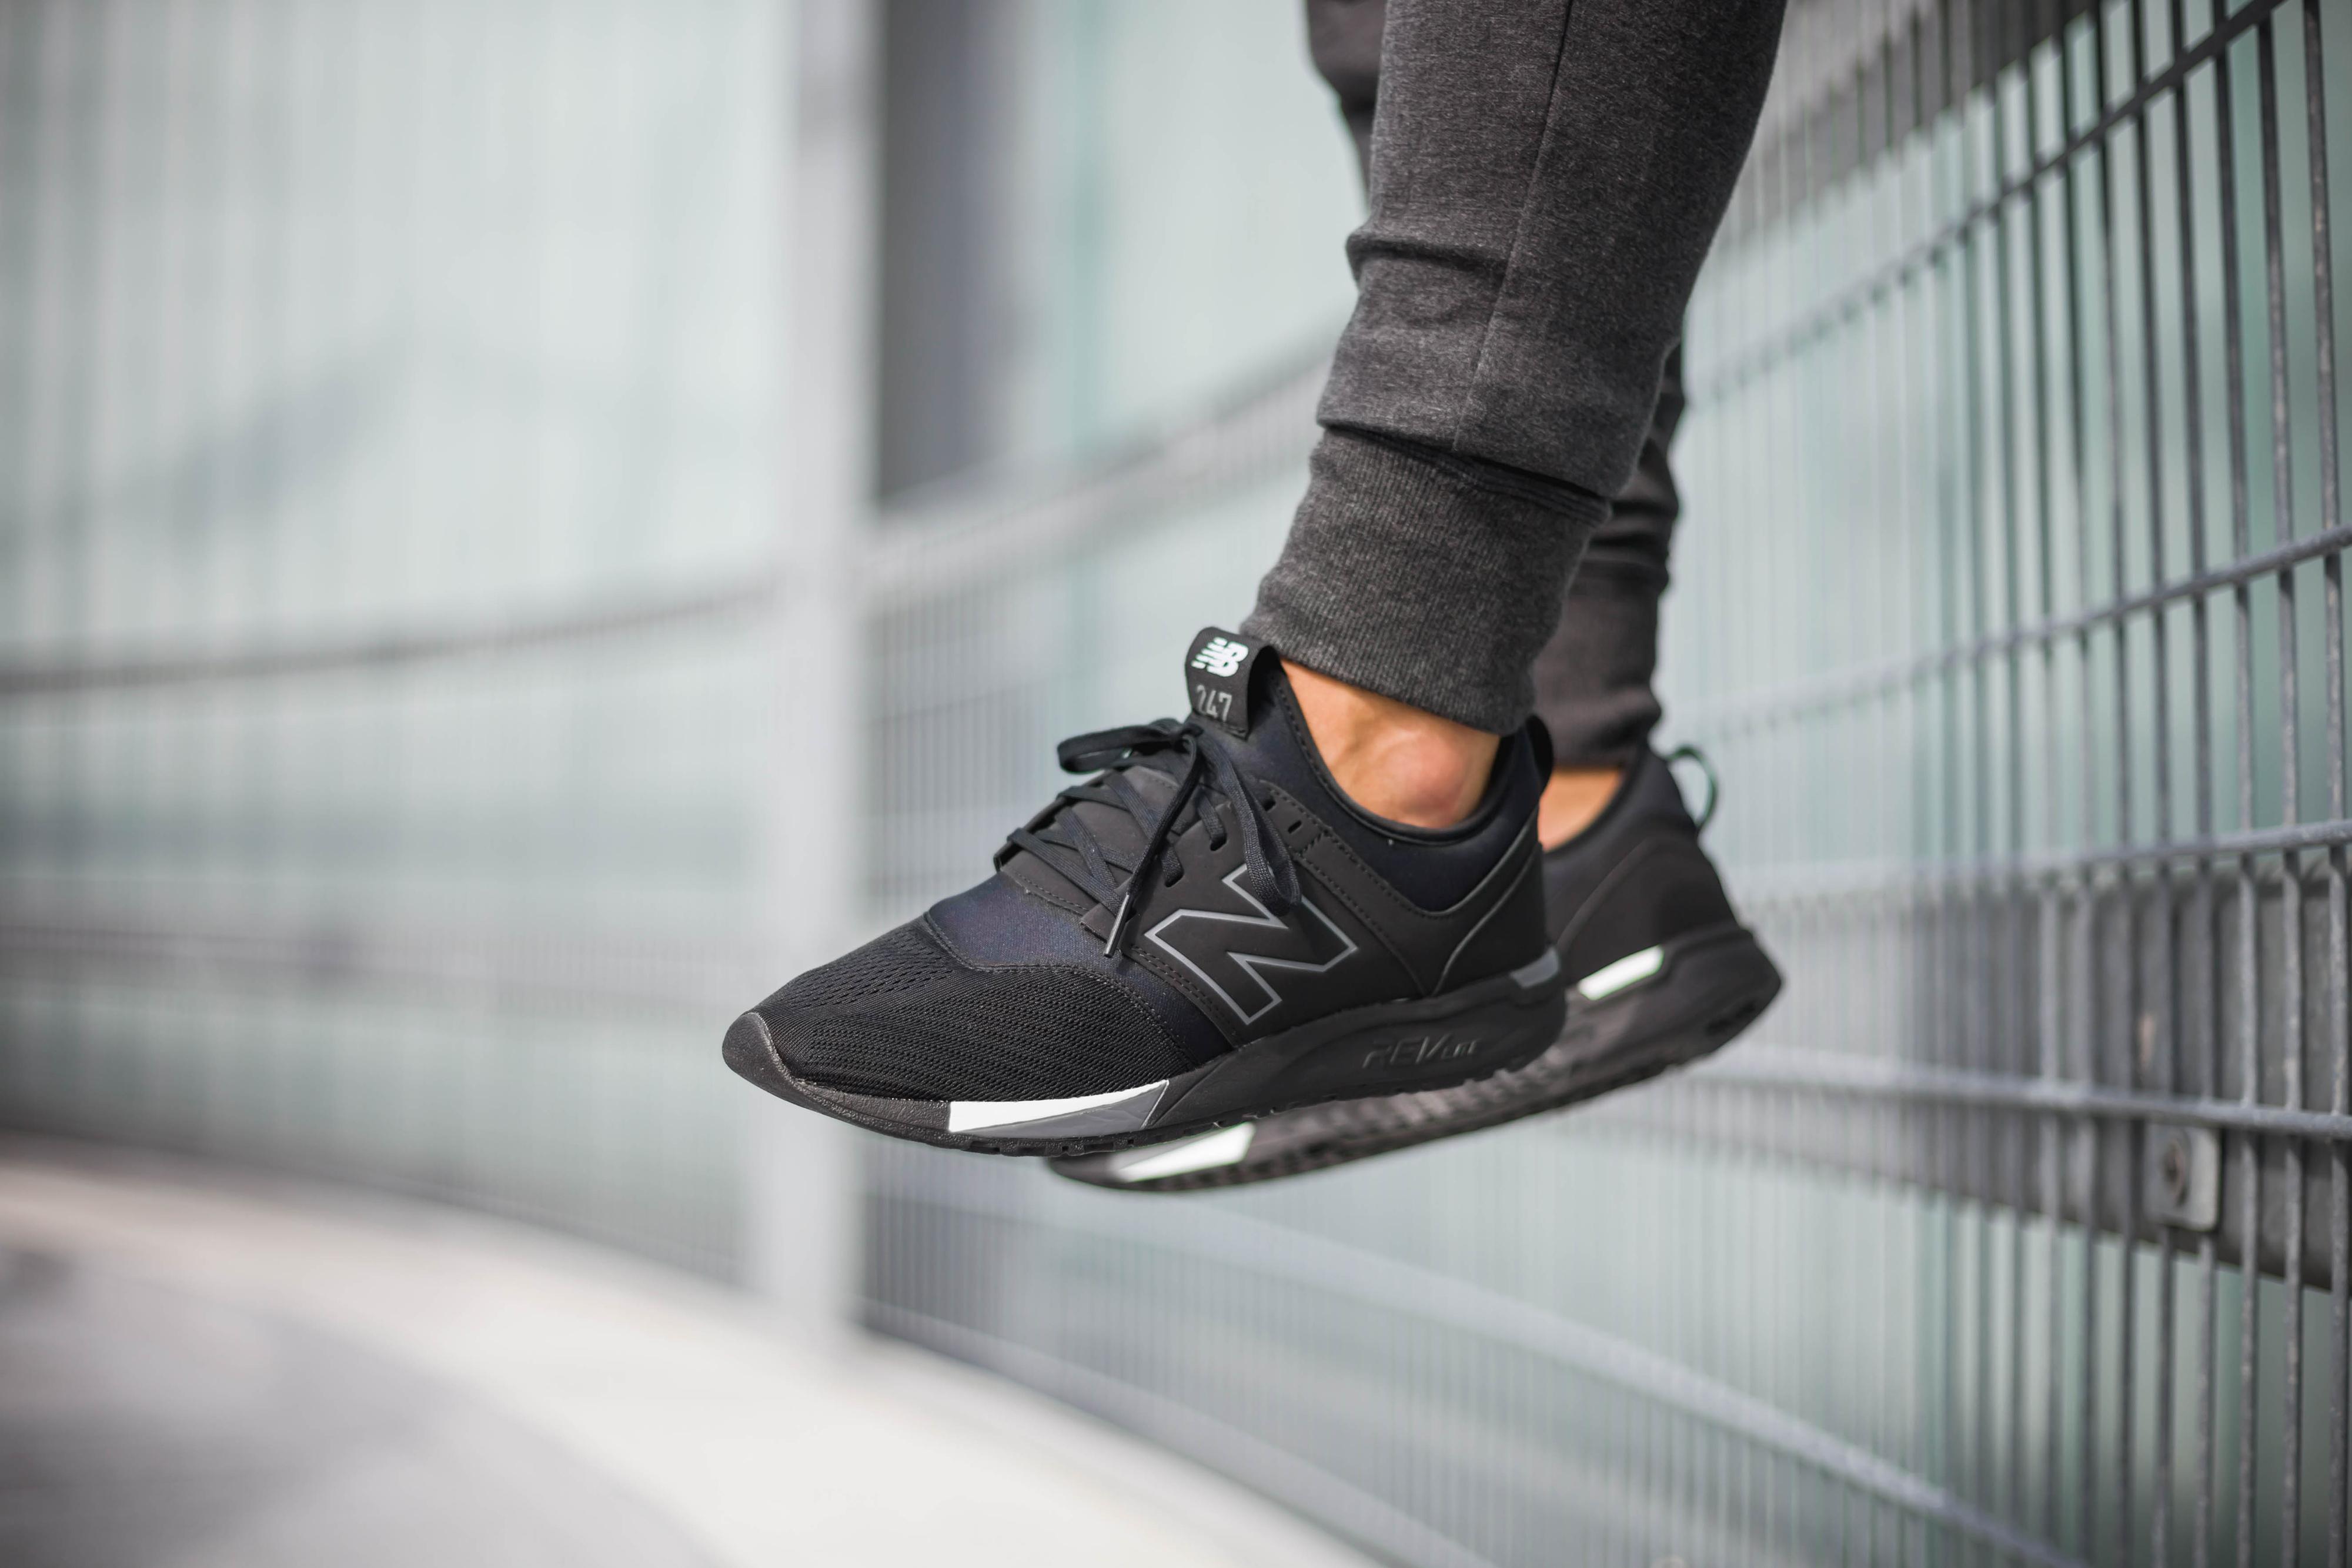 new balance 247 mrl for Sale,Up To OFF 65%